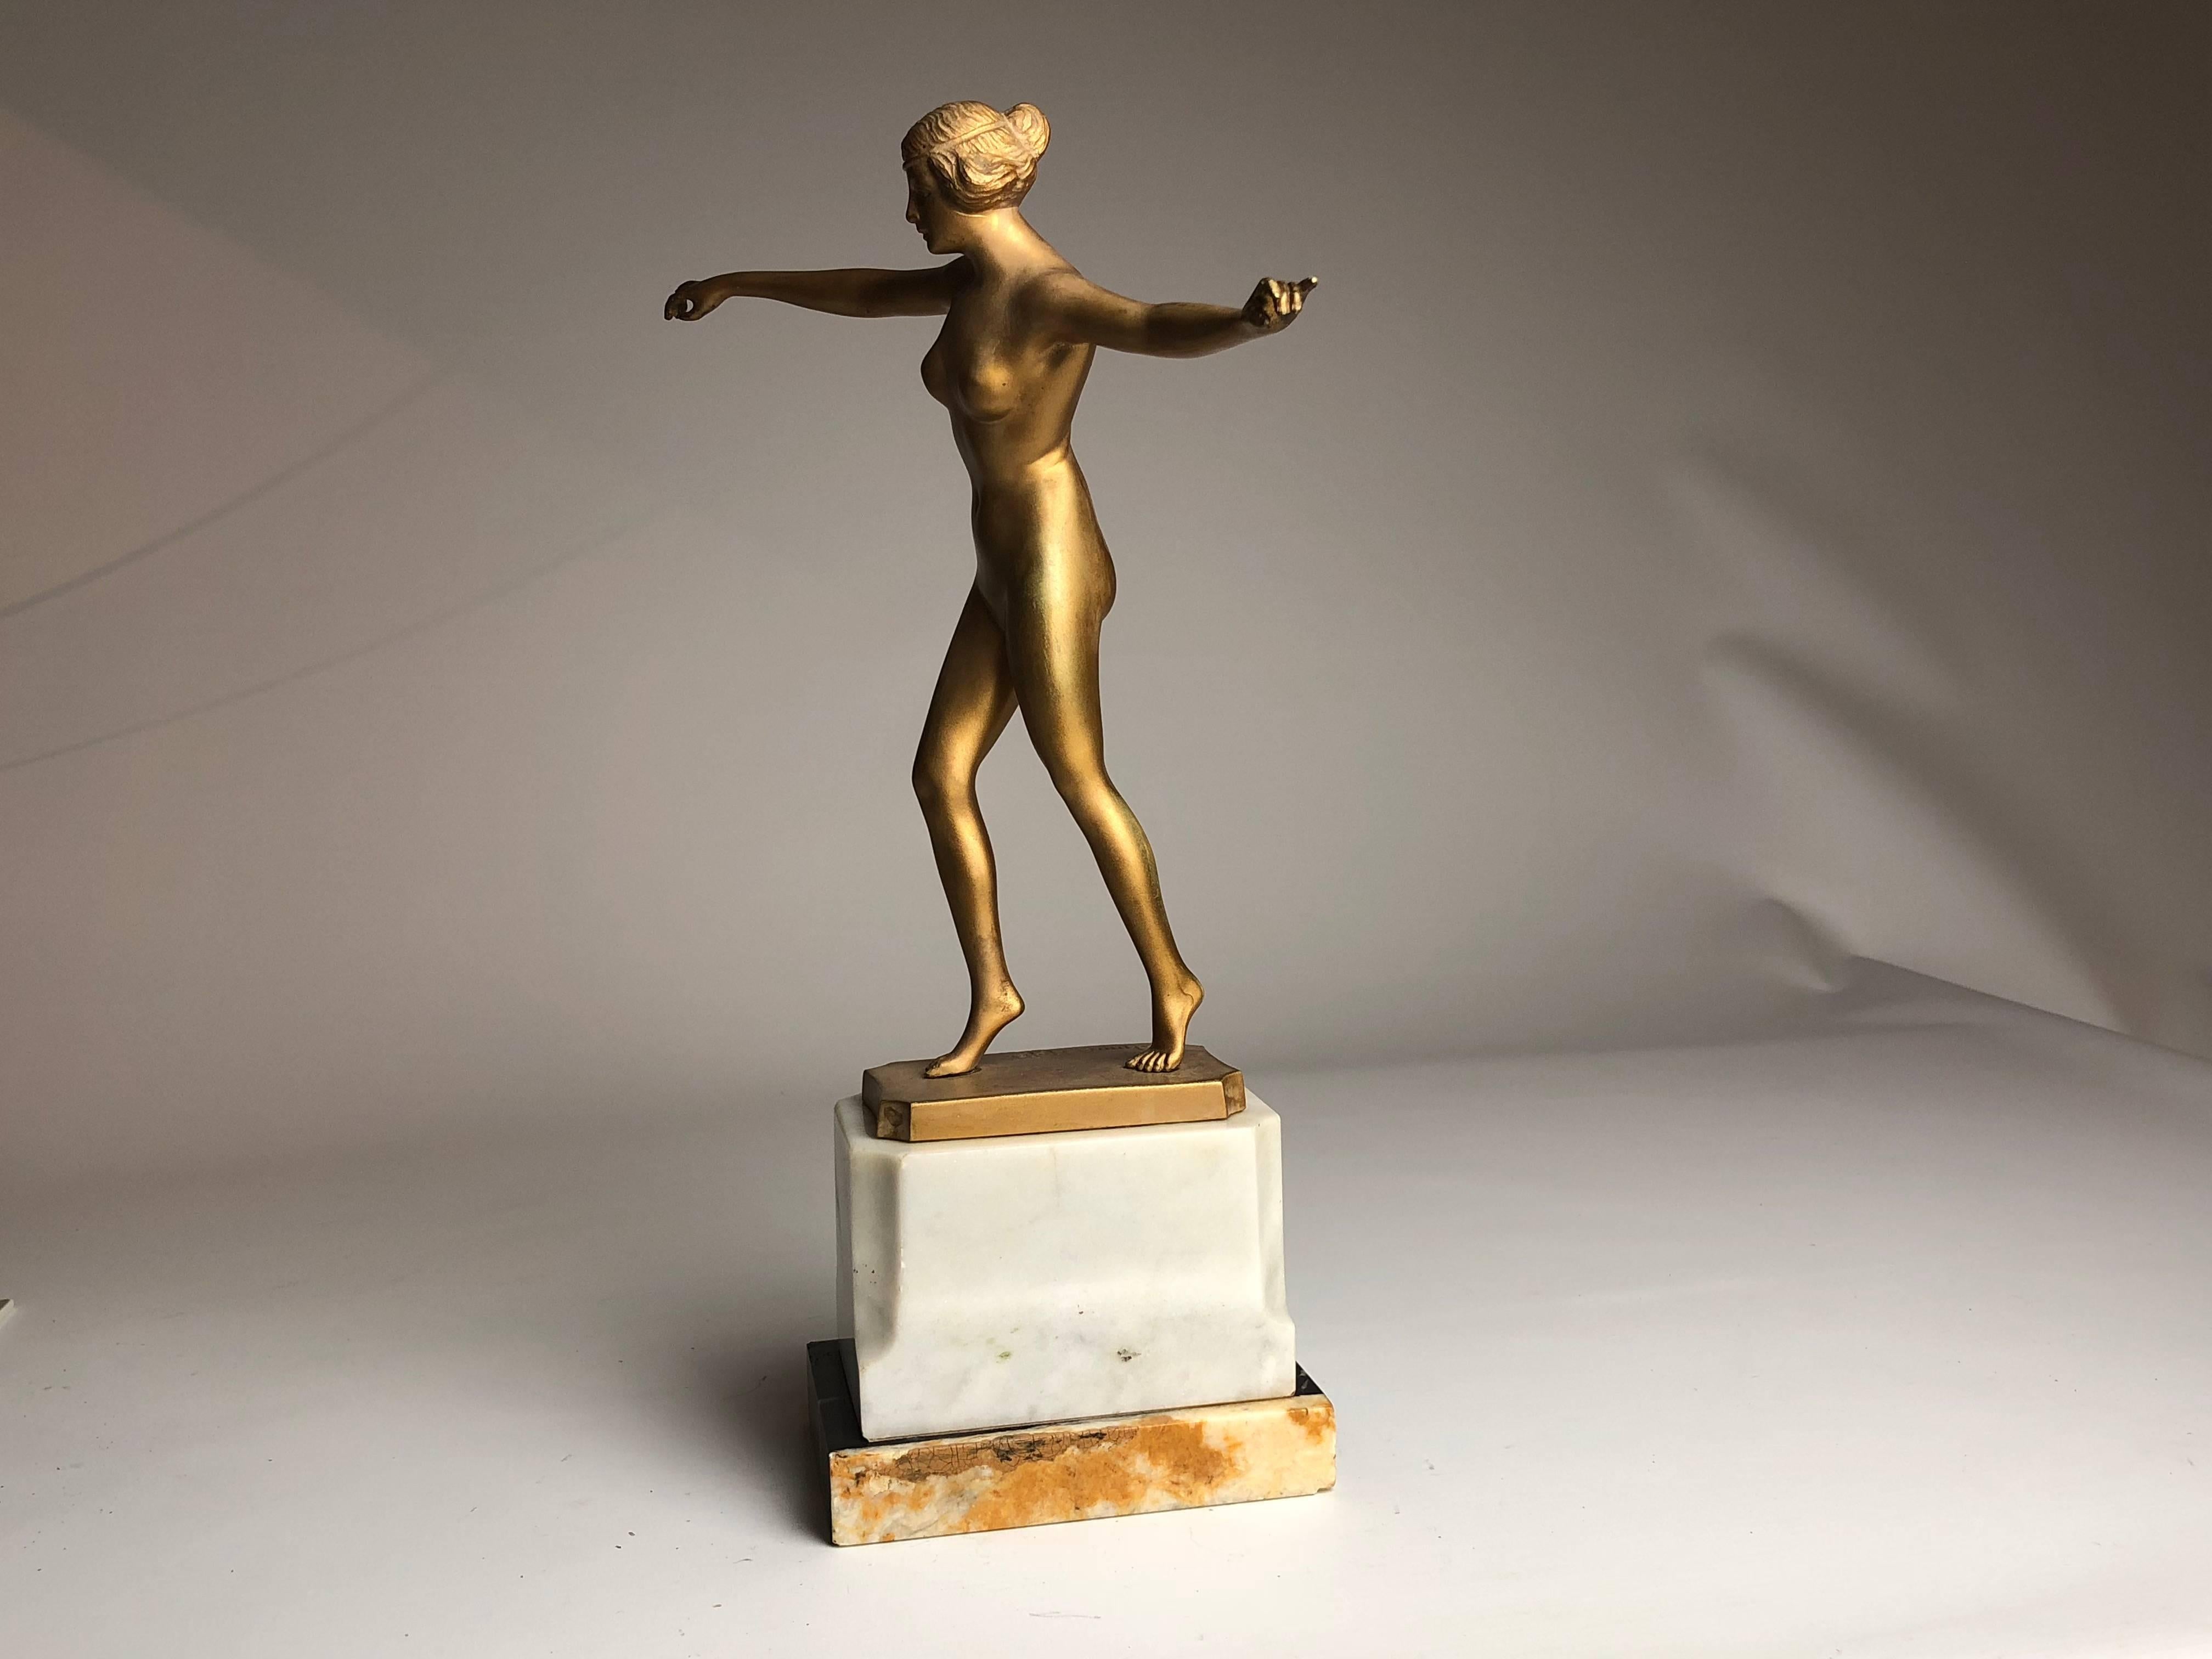 French Early 20th Art Deco gilded bronze Sculpture of a Female Nude by Schmidt Hofer